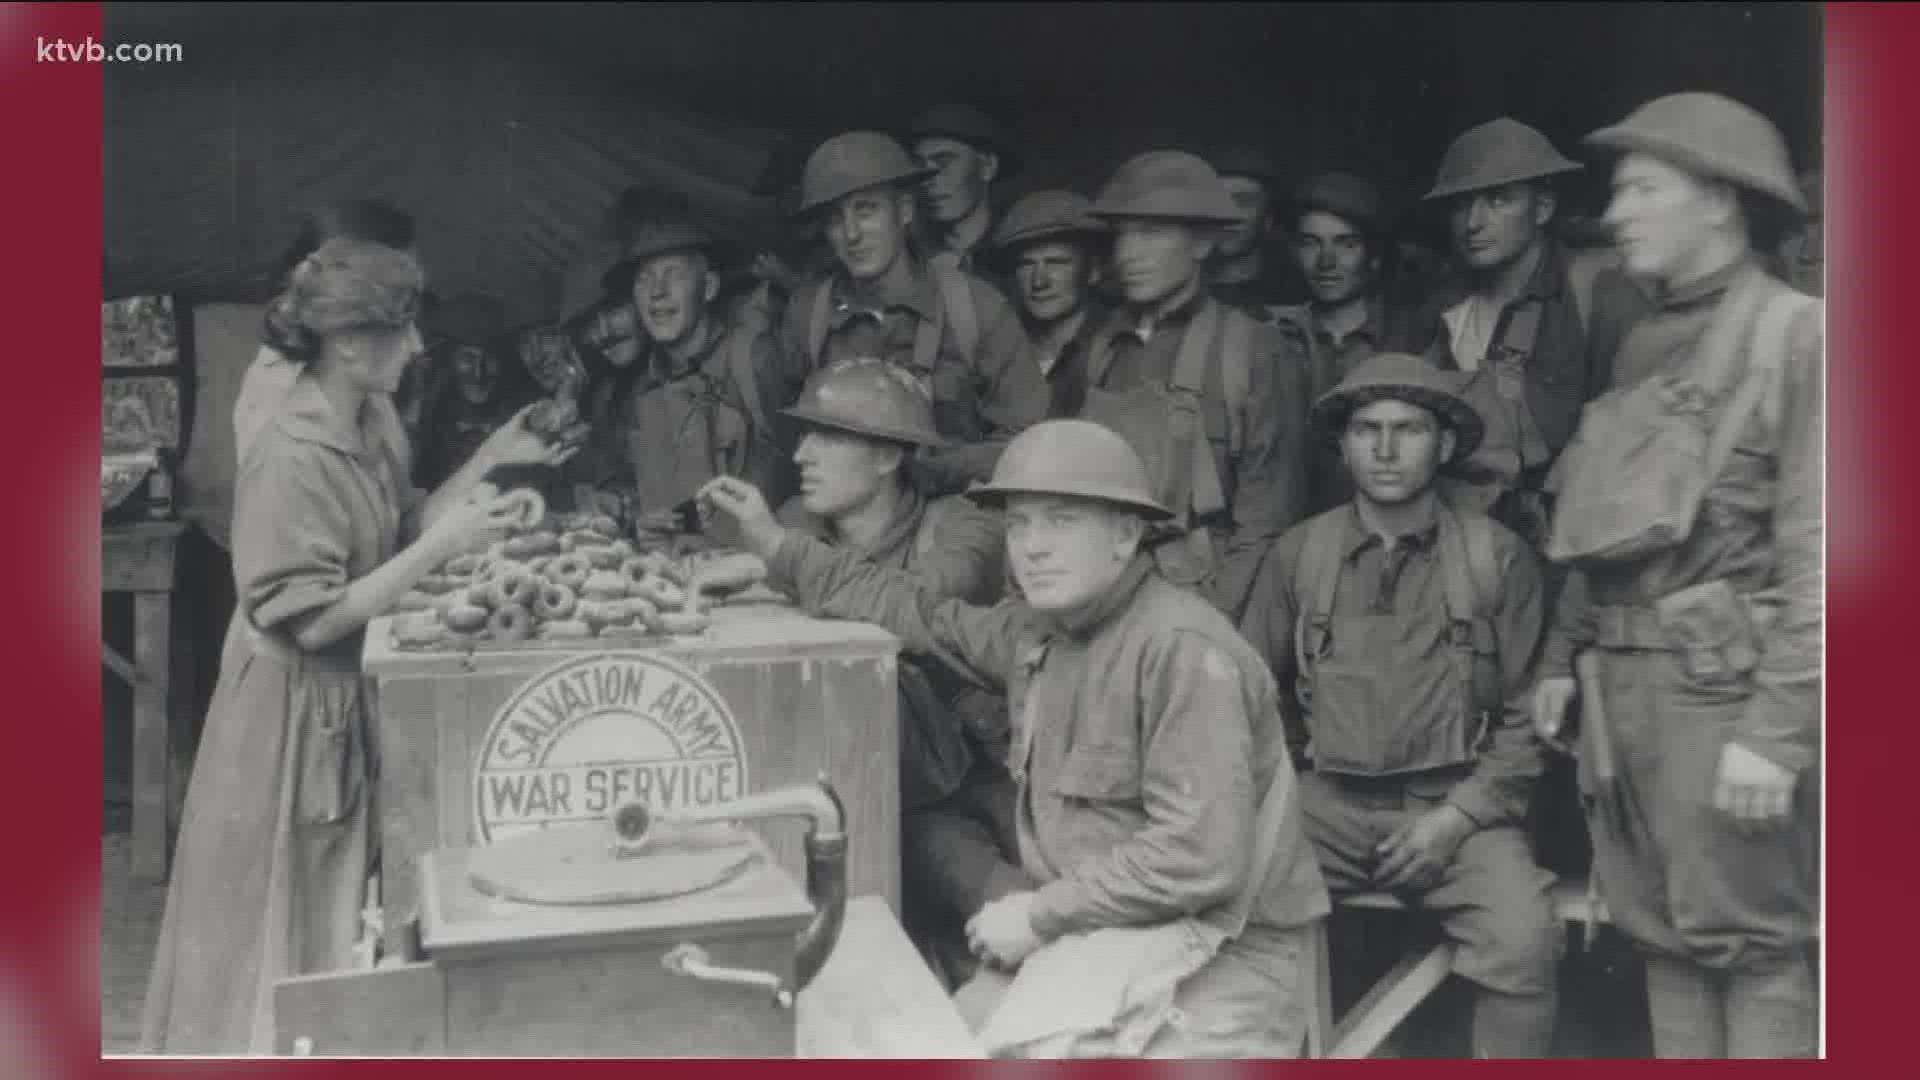 Volunteers with The Salvation Army, known as "Donut Lassies," served American troops on the front lines in France in 1917 with sweet treats, like doughnuts.